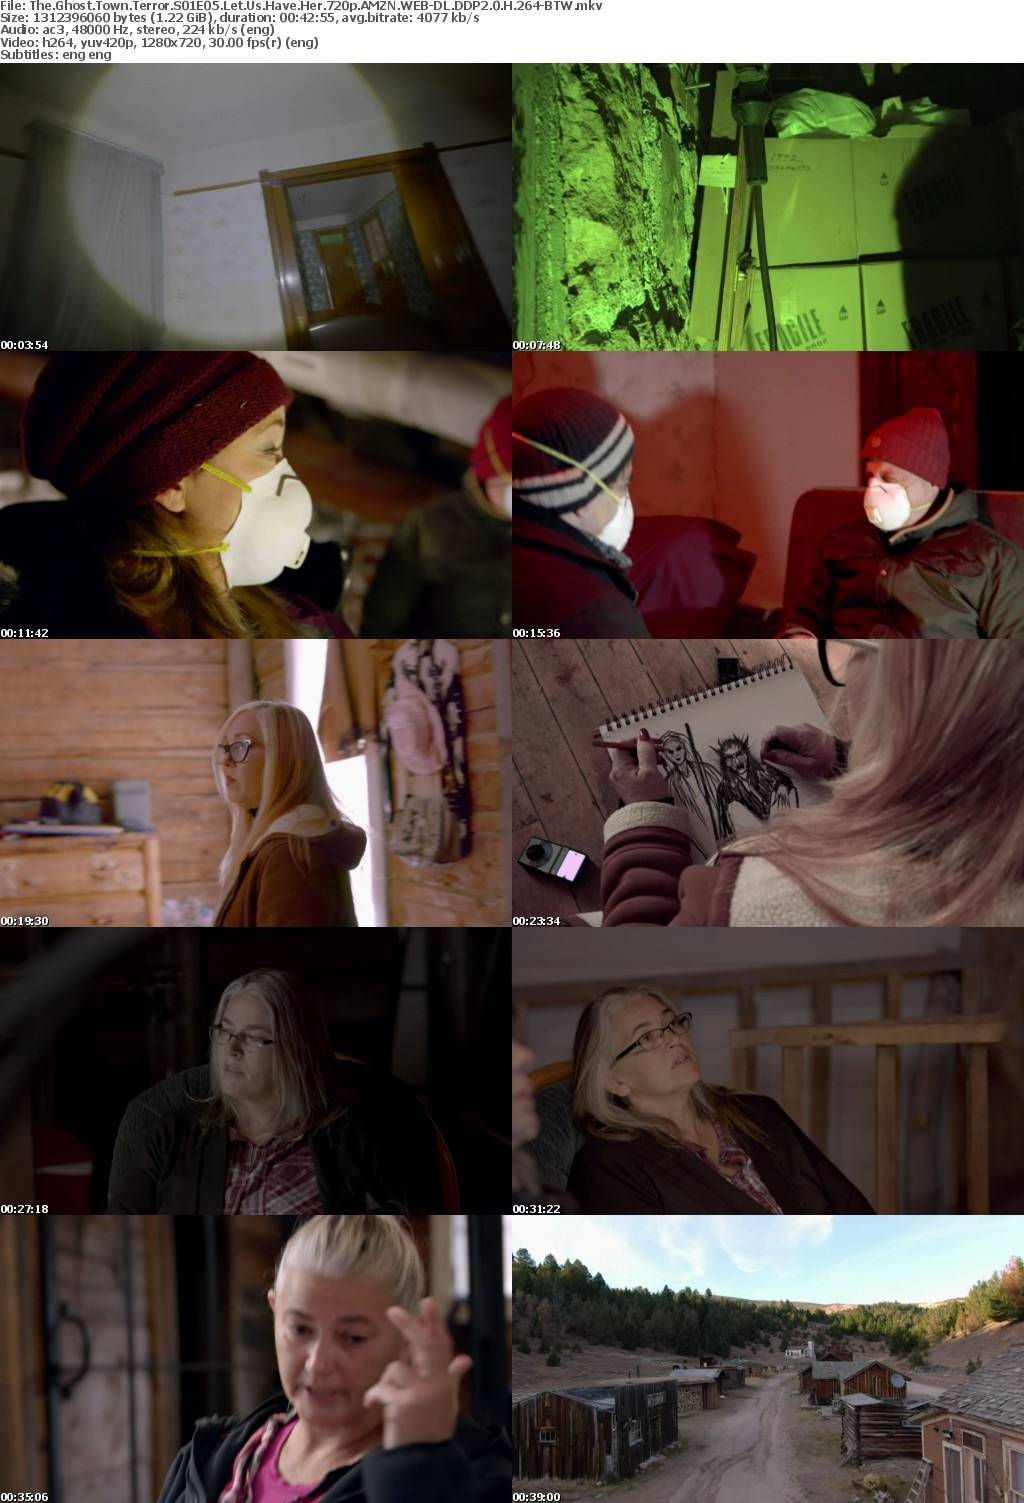 The Ghost Town Terror S01E05 Let Us Have Her 720p AMZN WEBRip DDP2 0 x264-BTW